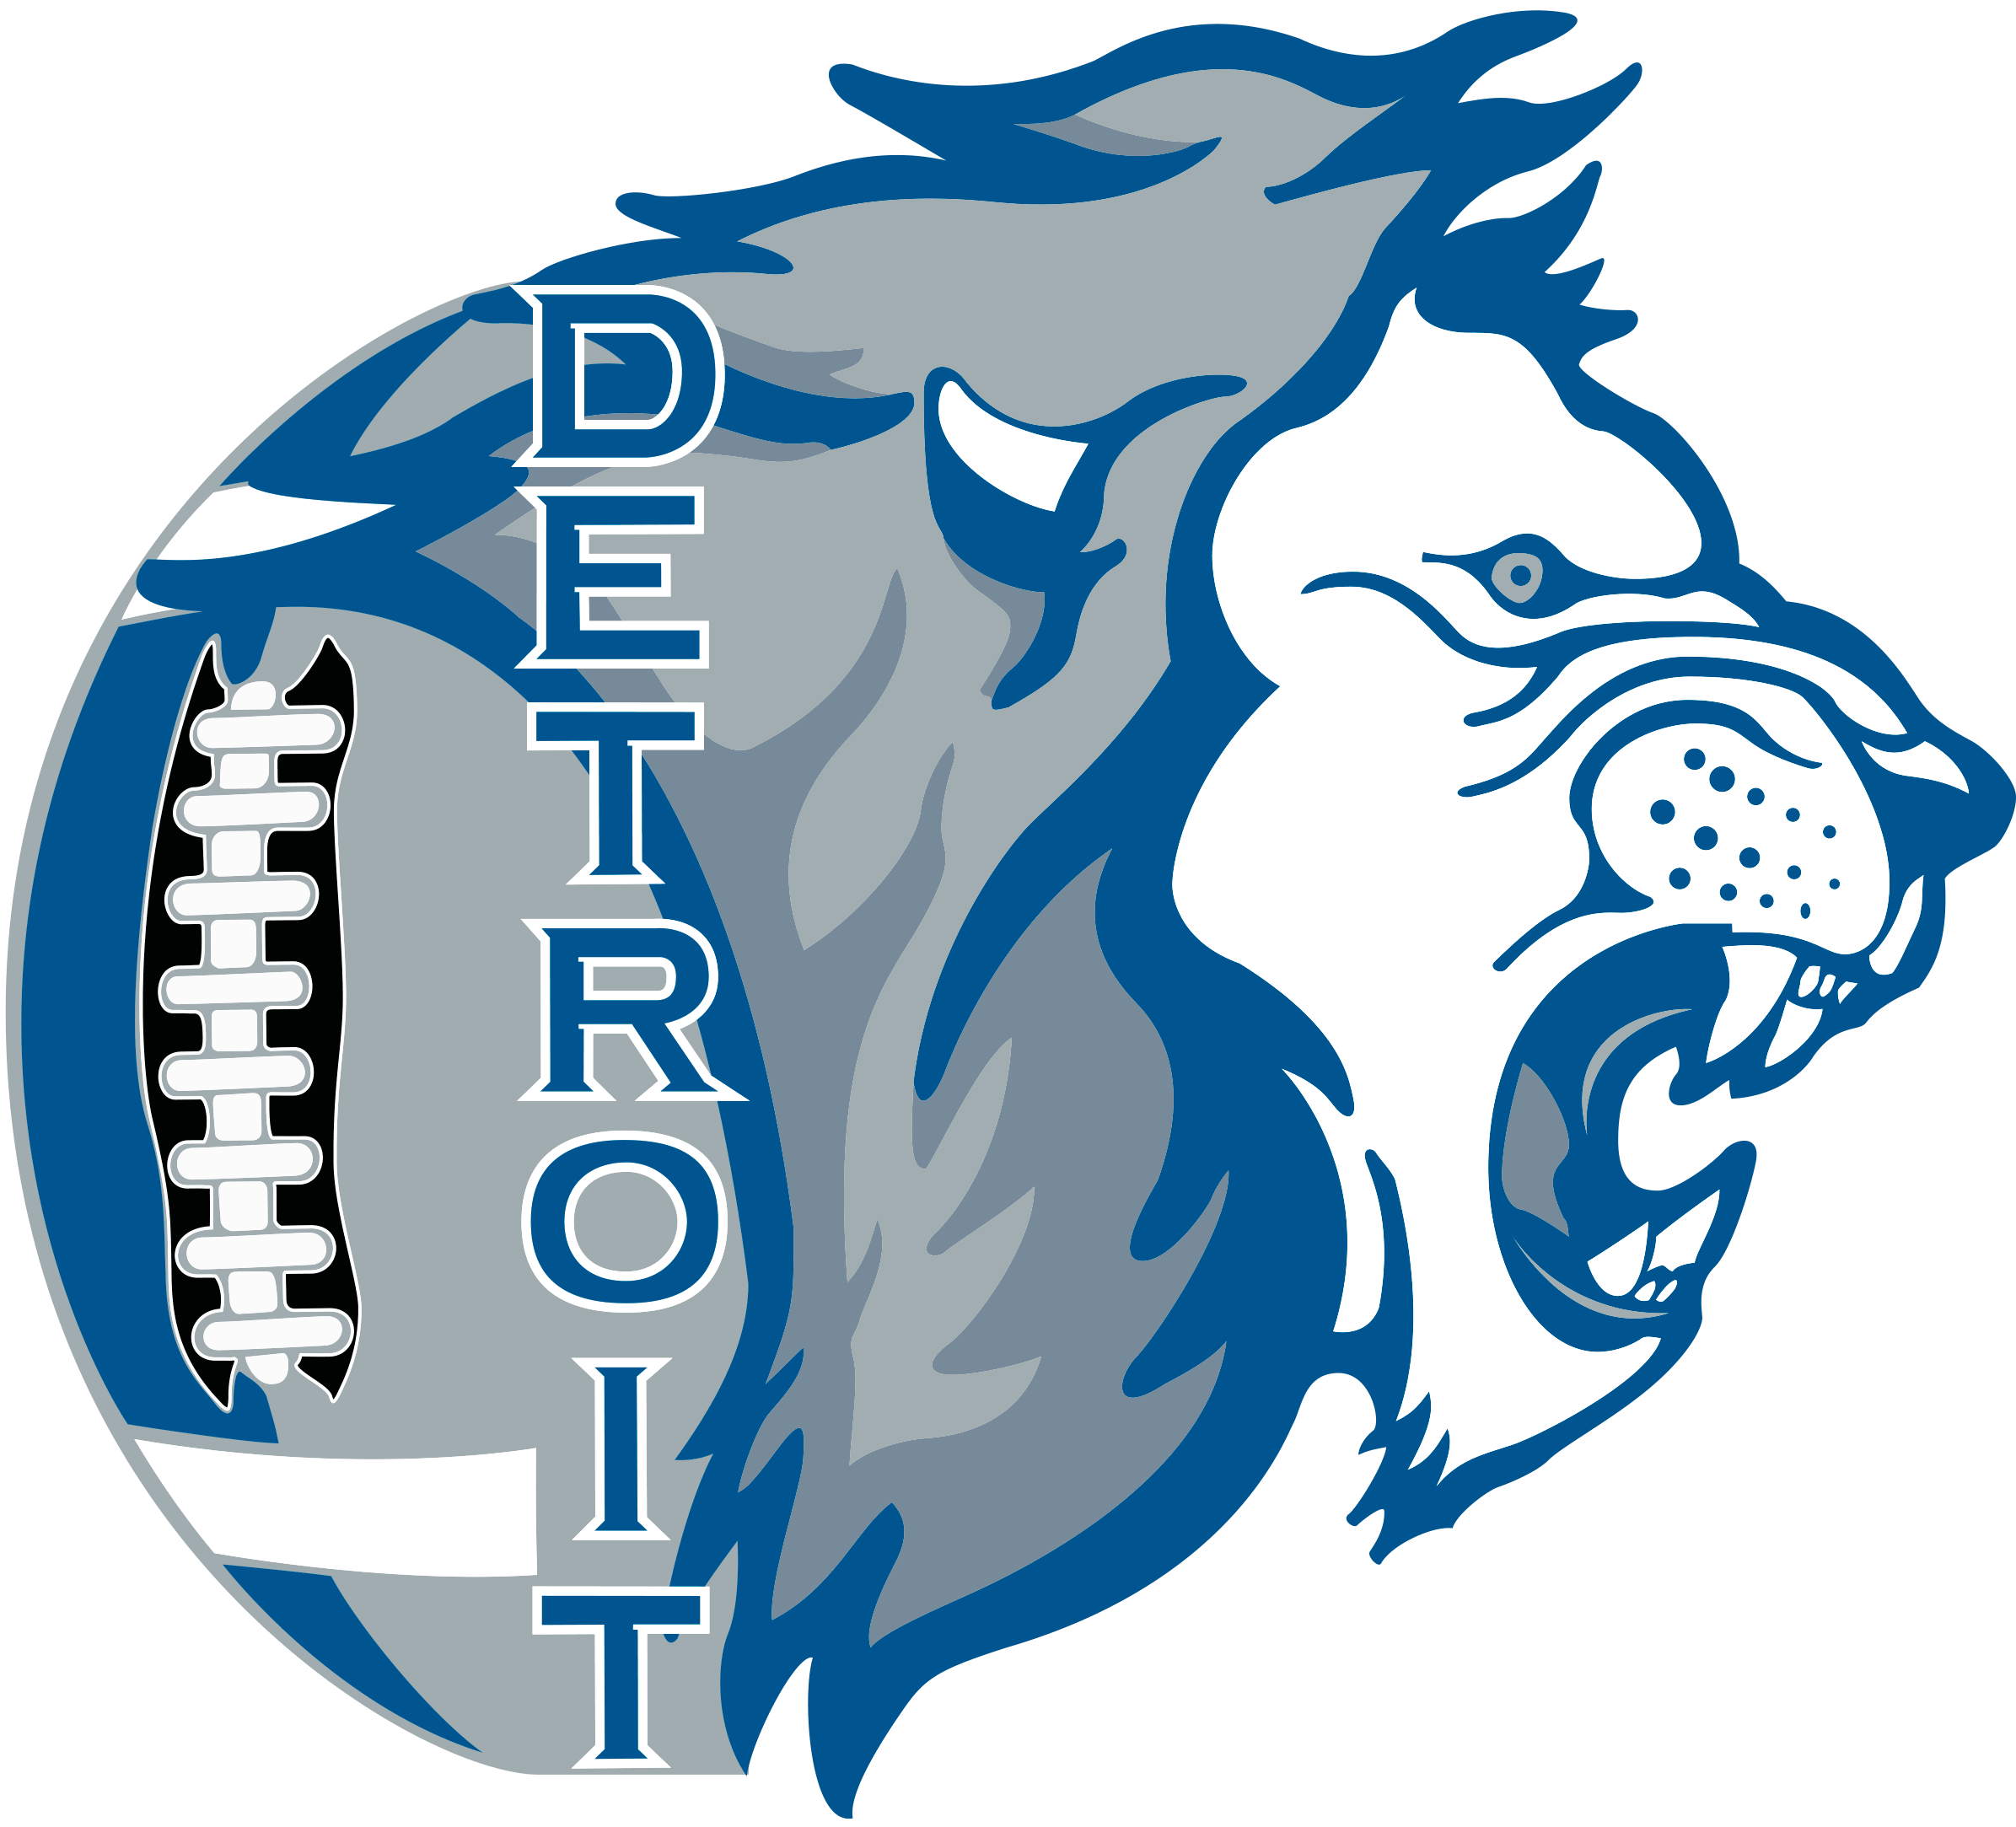 Detroit Lions Svg Files For Silhouette Files For Cricut Svg Dxf Eps Png Instant Download Detroit Lions Svg Svg Files For Silhouette Files For Cricut Svg Dxf Eps Png Instant Download